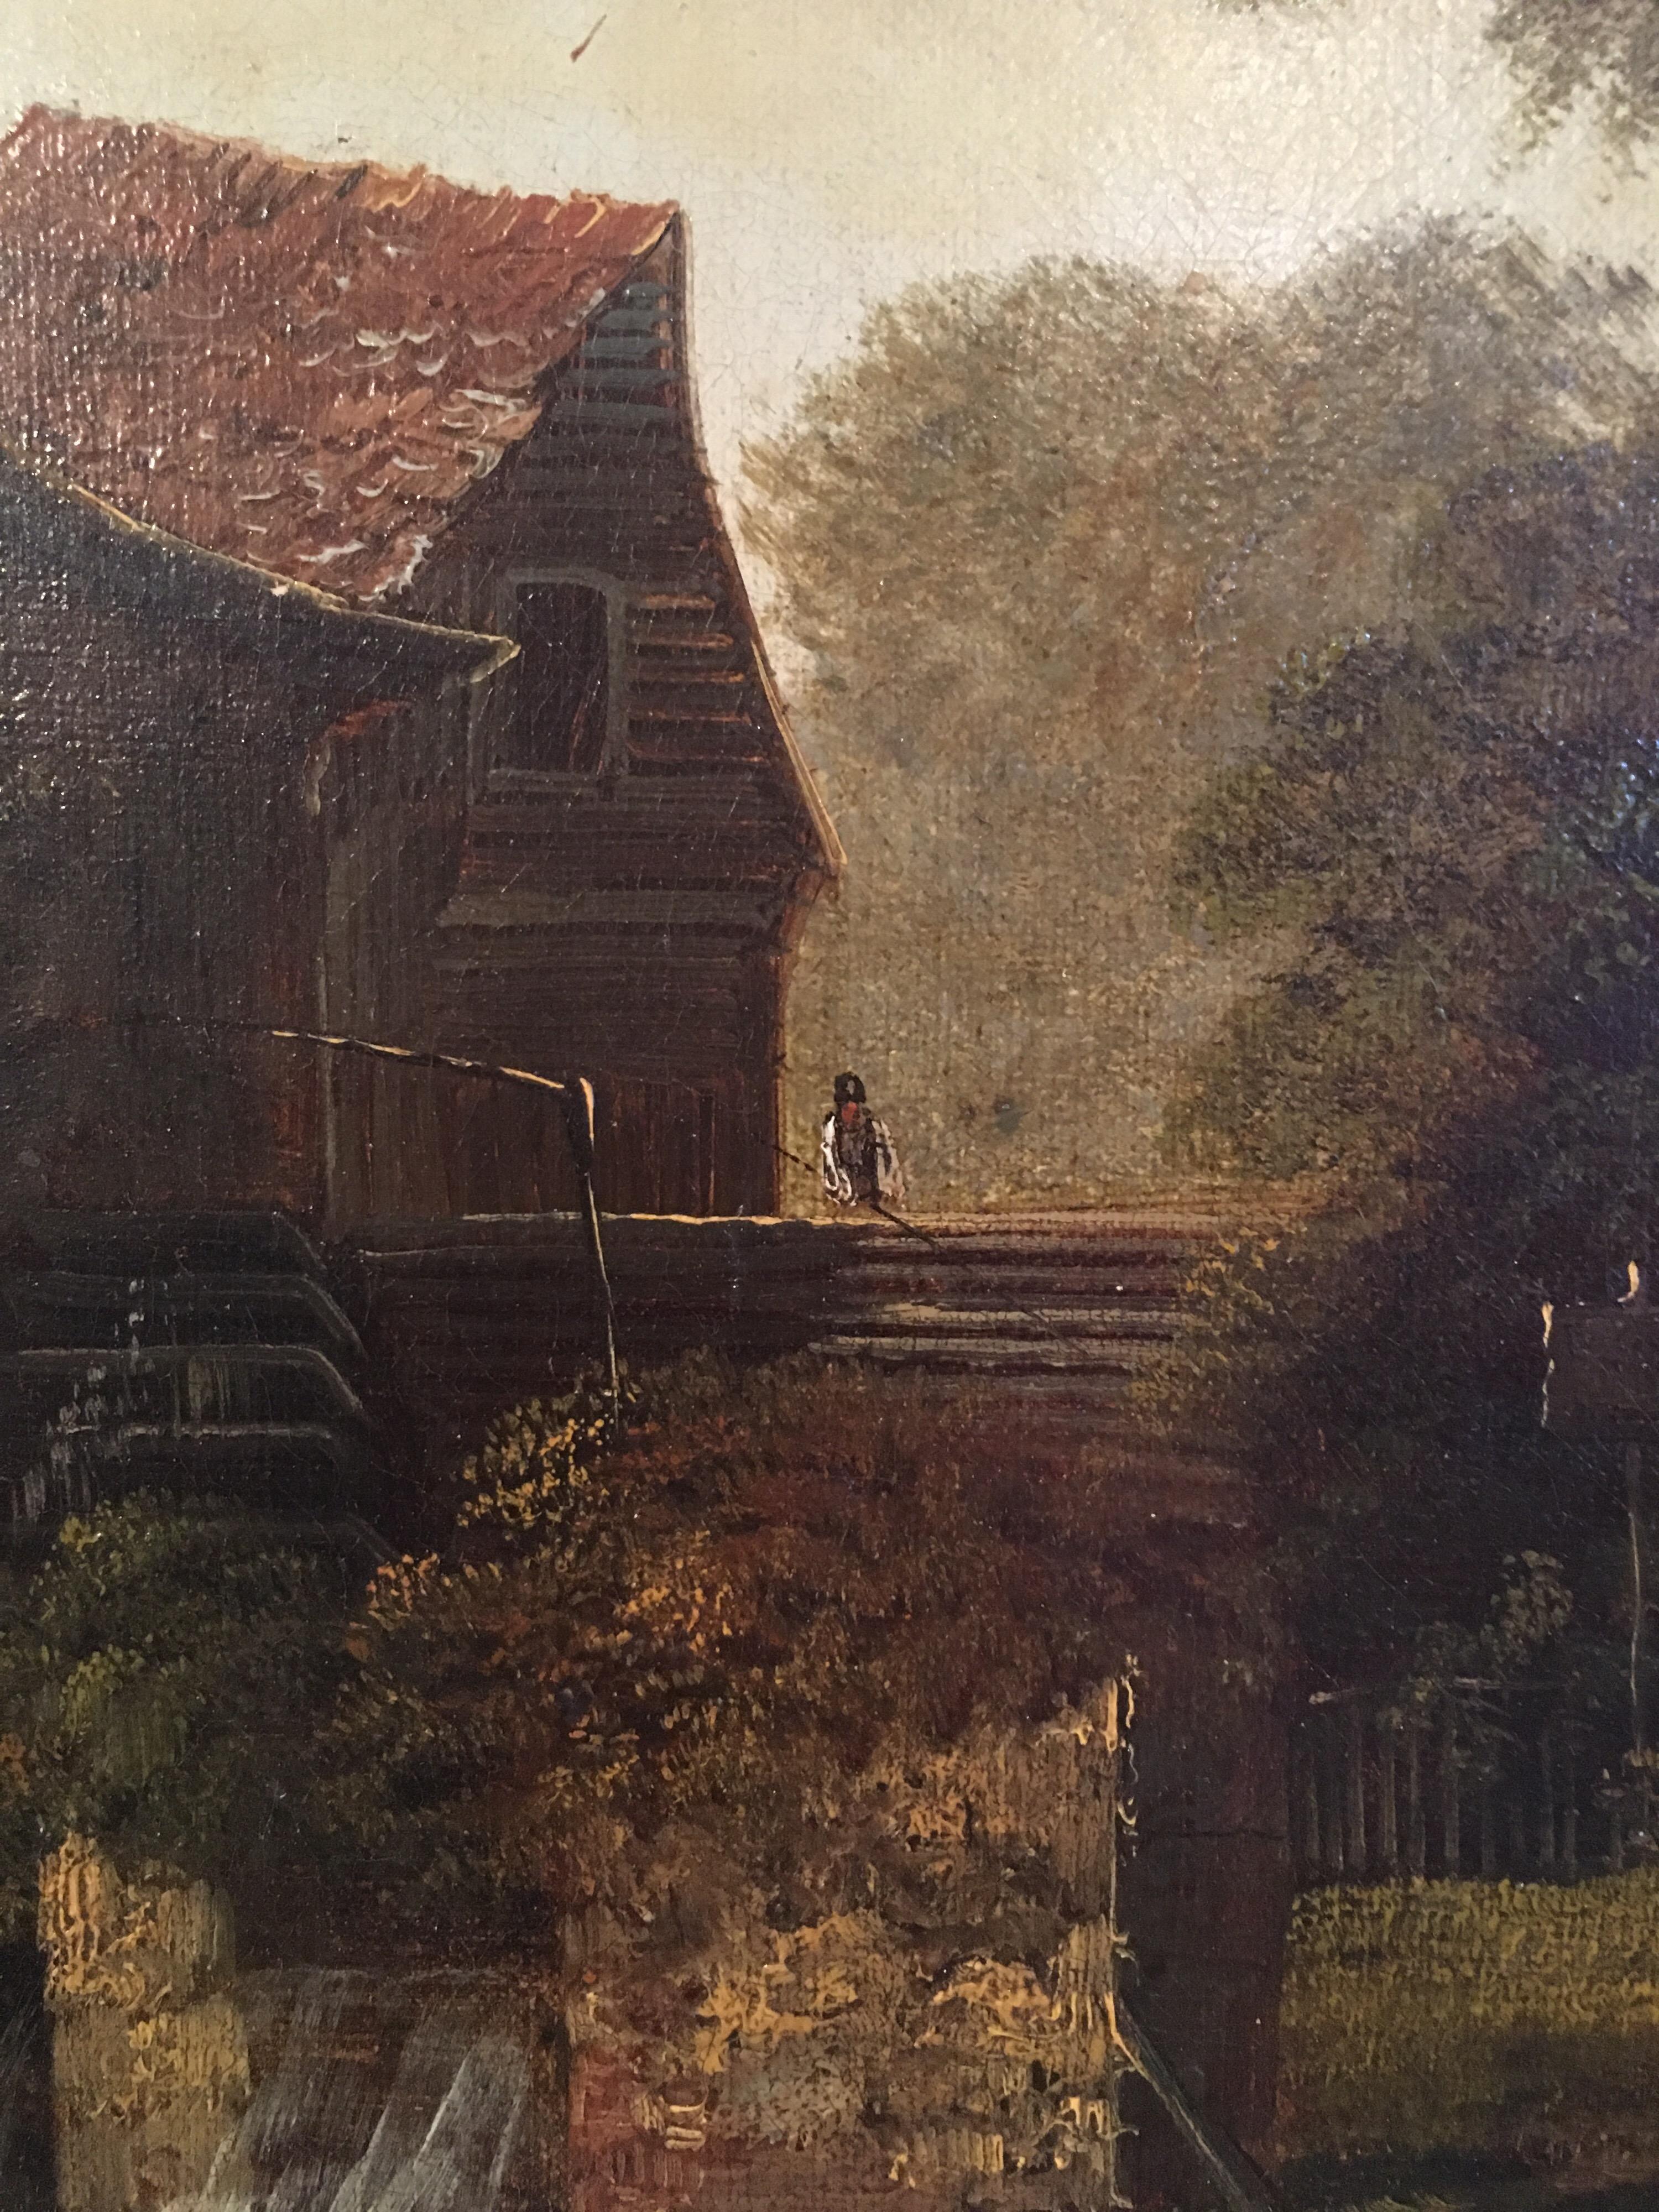 The Water Mill
by Charles Greville Morris (British 1861-1922)
Signed by the artist on the lower left hand corner
Oil painting on canvas, framed
Framed size: 21.5 x 17.5 inches

Wonderfully atmospheric oil painting of a rustic water mill, showing